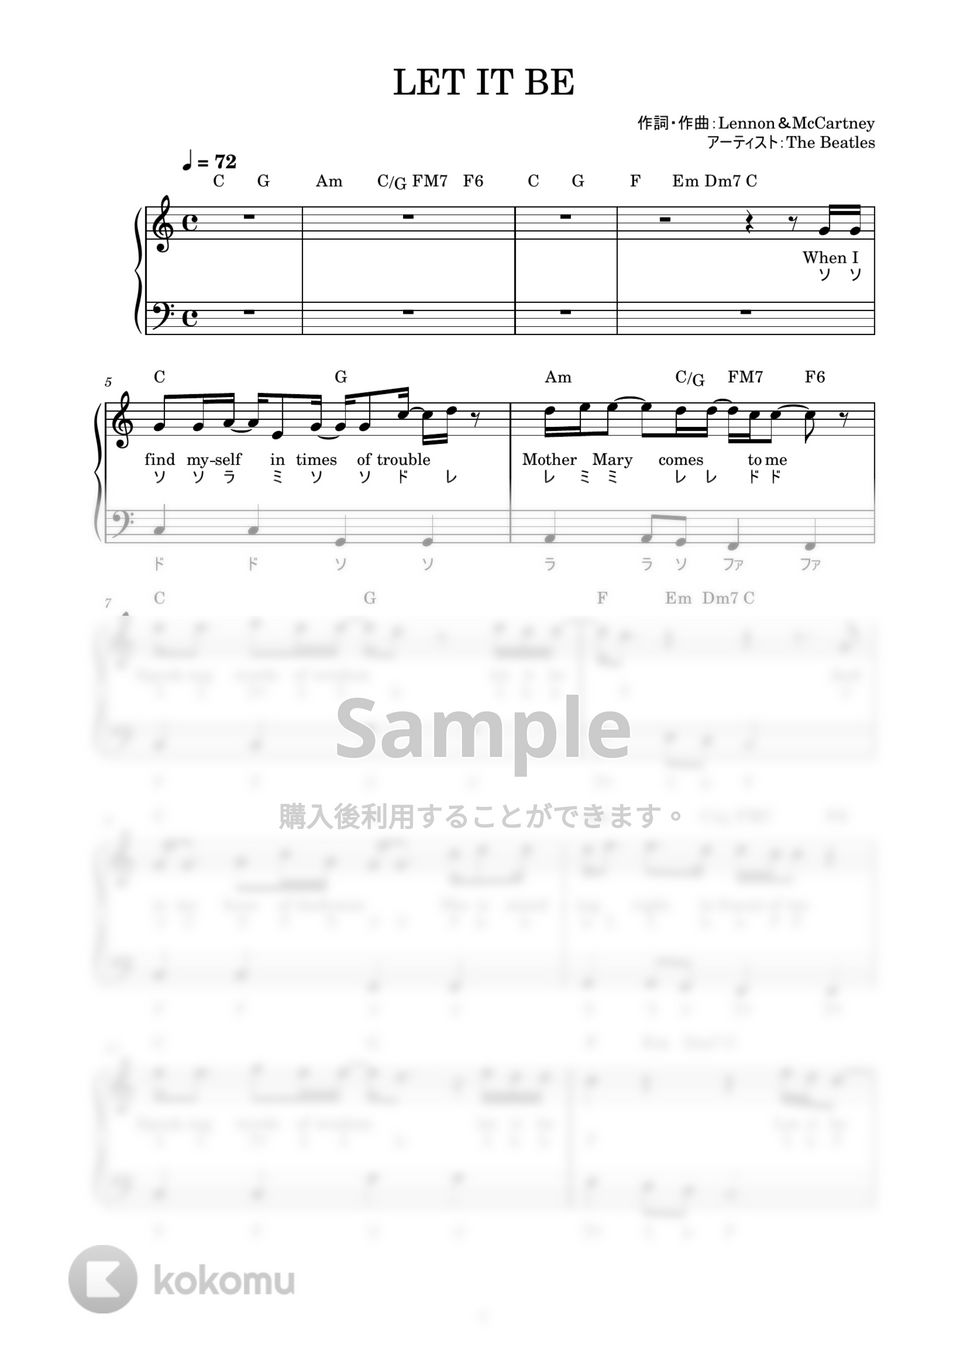 The Beatles LET IT BE (かんたん 歌詞付き ドレミ付き 初心者) 楽譜 by